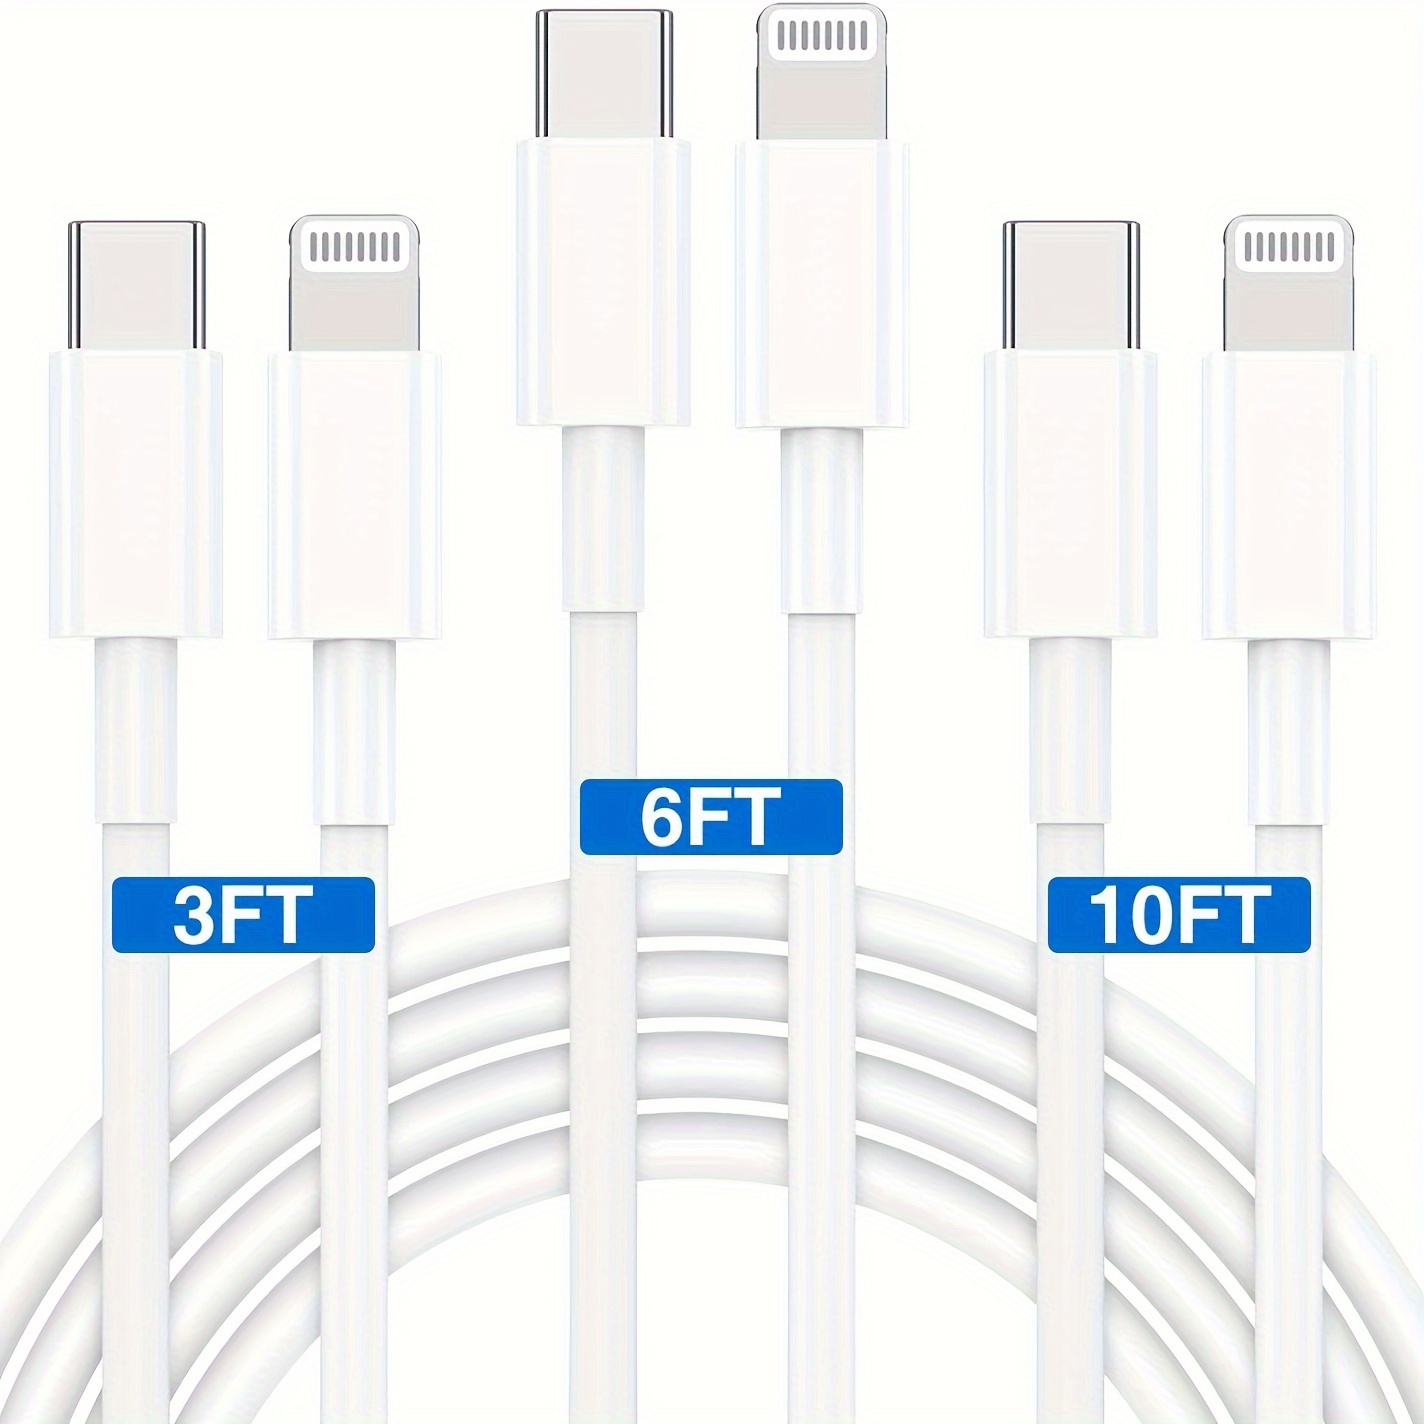 

Usb C To Cable 3/6/10 Feet, 1 Pack 3 Packs [ Mfi Certified] For Fast Charging 3/6/10 Feet, Fast Charge Type C To Power Cable For 14/13/12/11 Pro Max Min I,